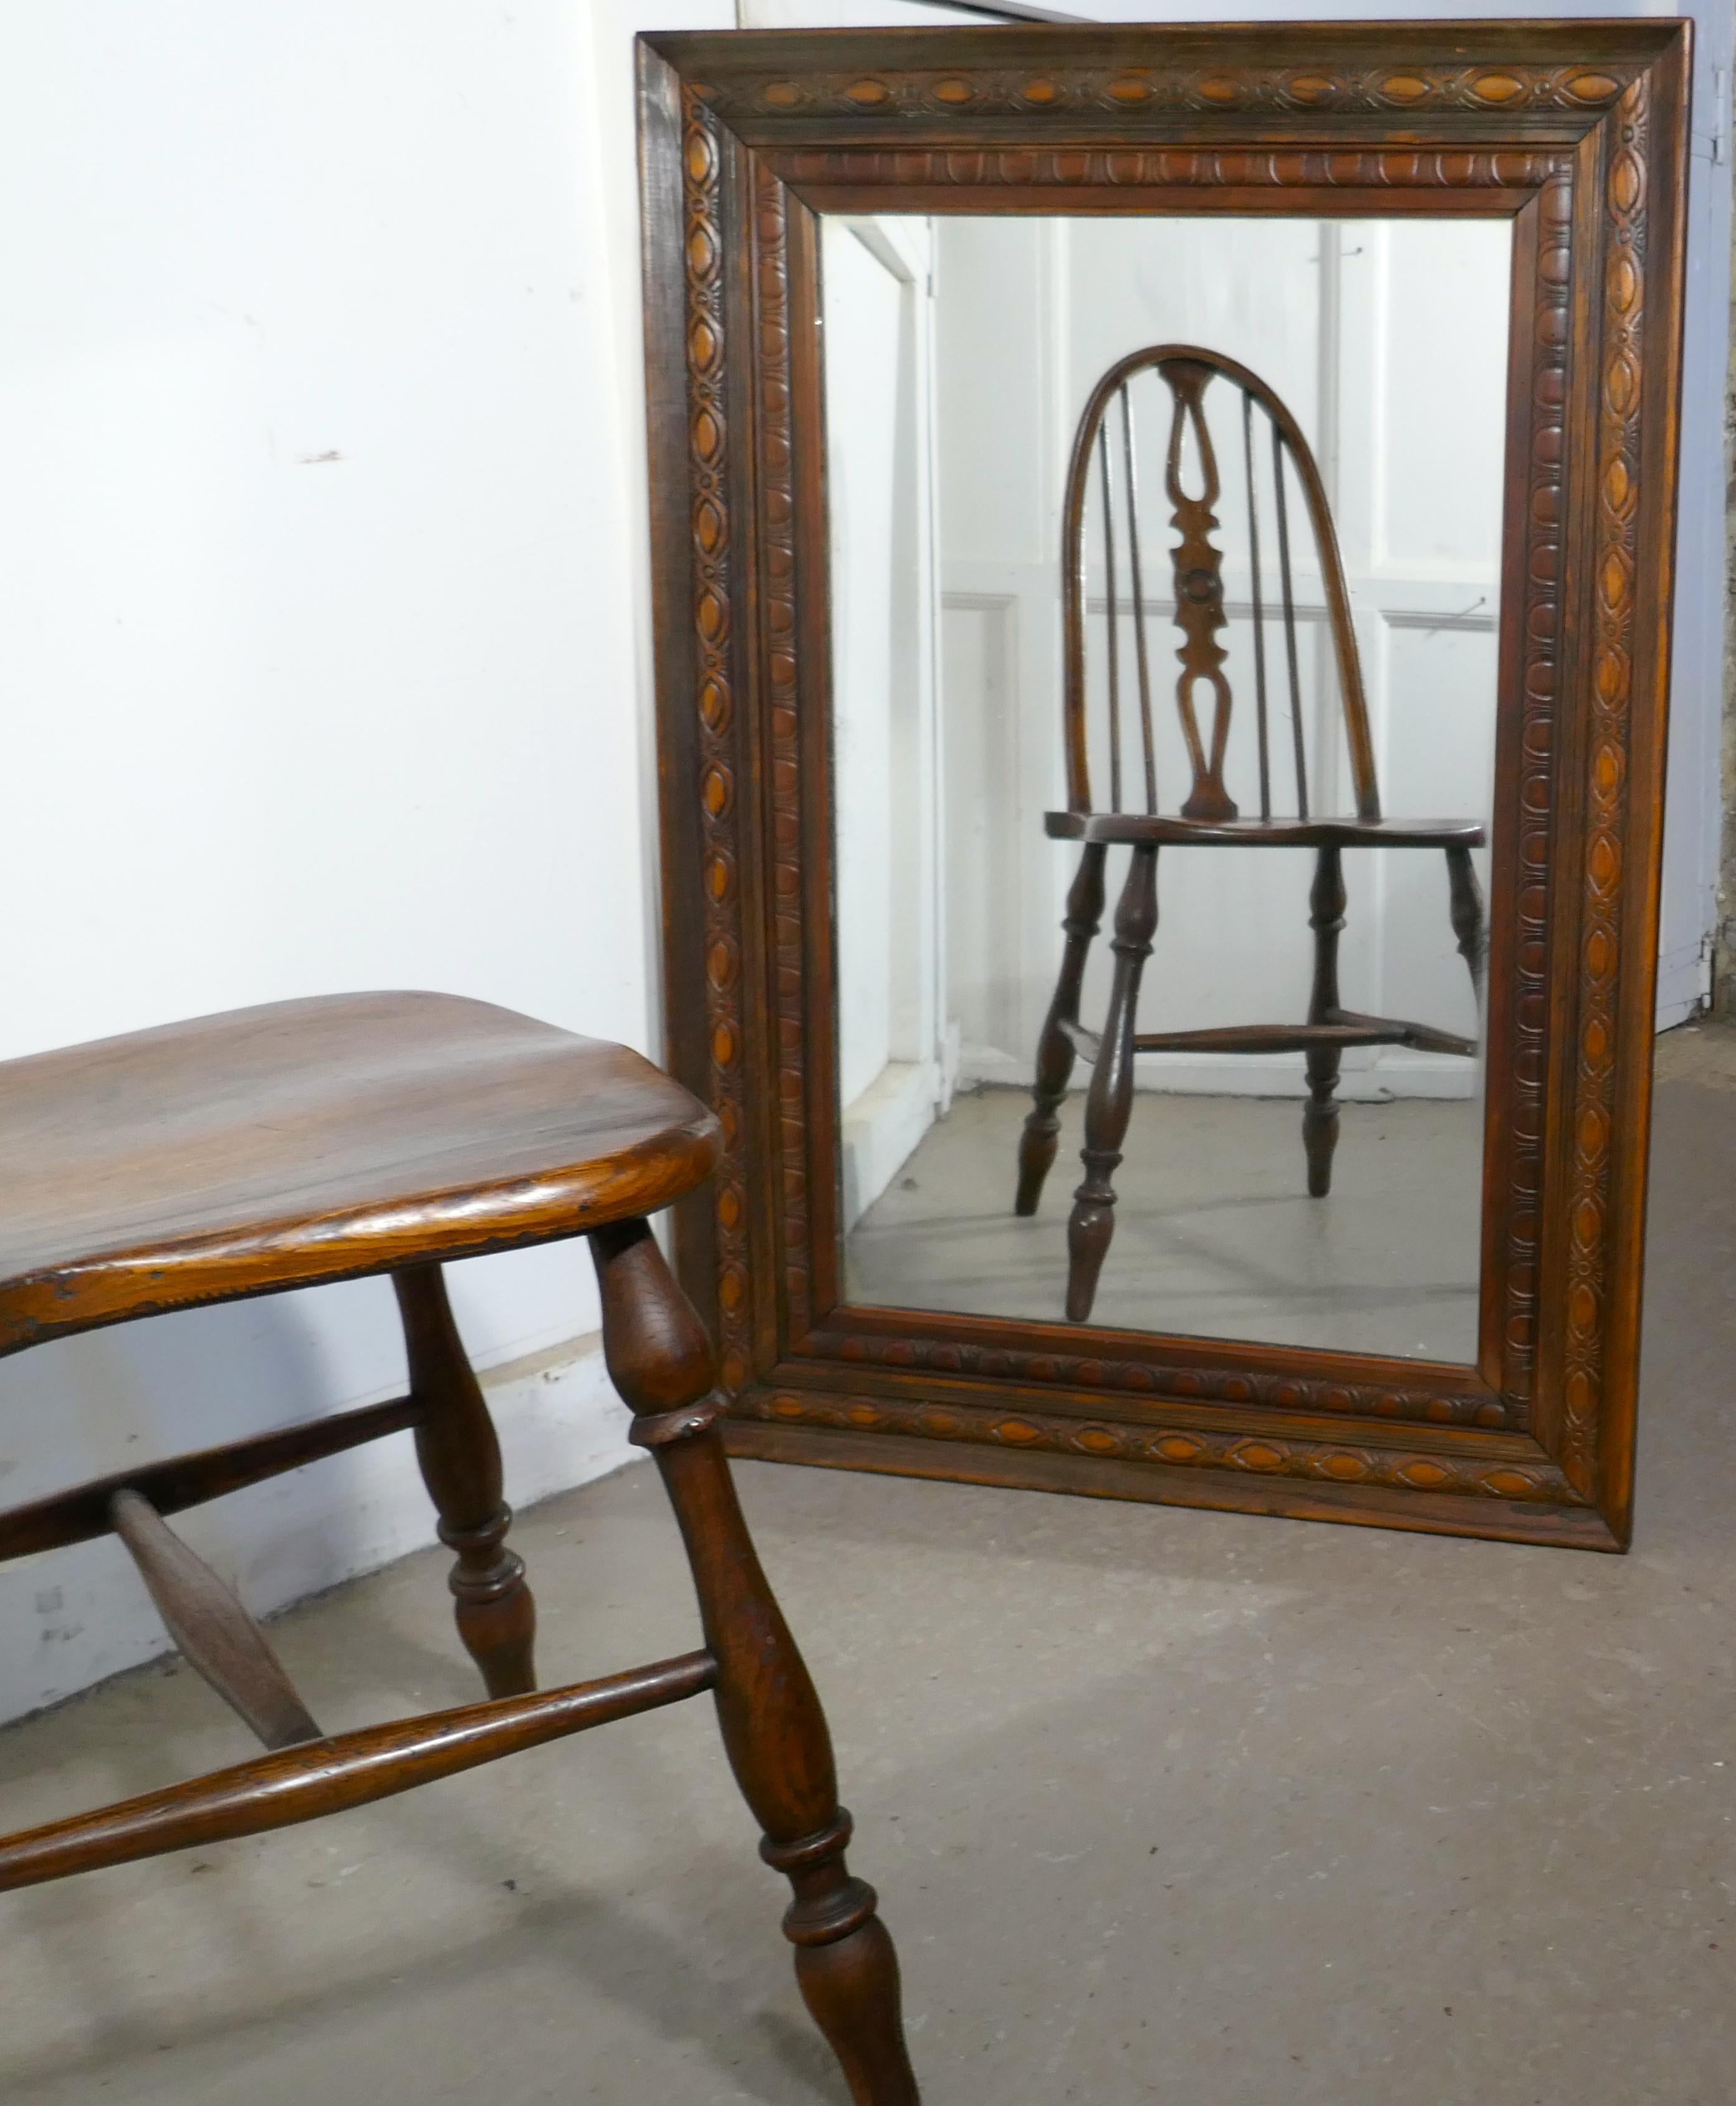 A 19th century carved oak mirror

The oak mirror frame is 4.5” wide and carved in the style typical of this time
The heavy mercury plate glass mirror has a wonderful sparkle, all in good condition with a replaced back
The mirror is 38.5” high,